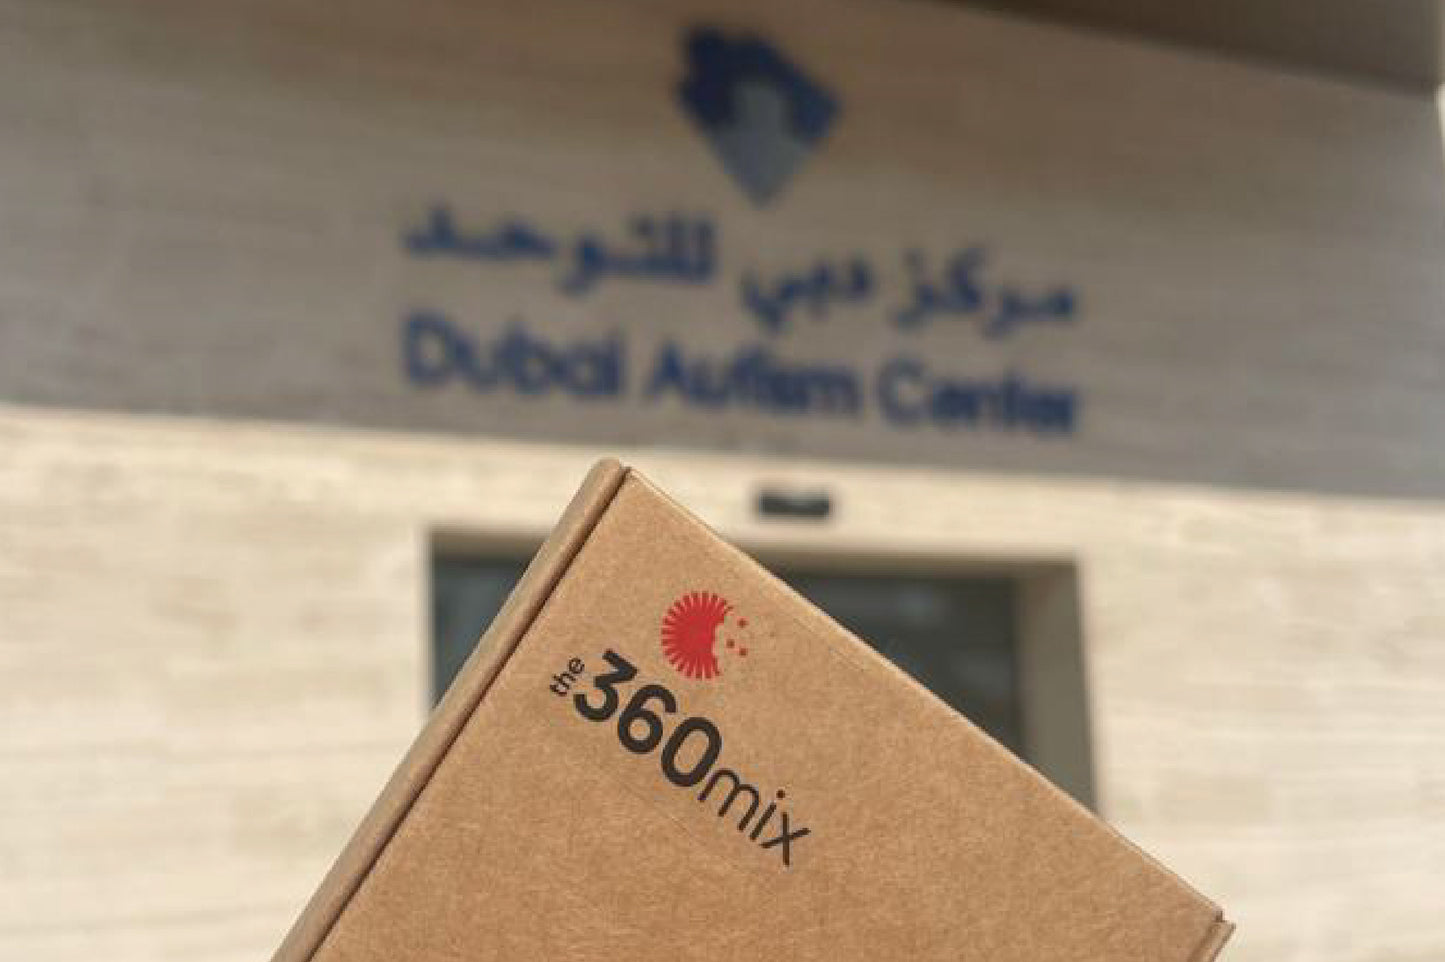 Dubai Autism Center Mission Snack Box | Buy One Give One